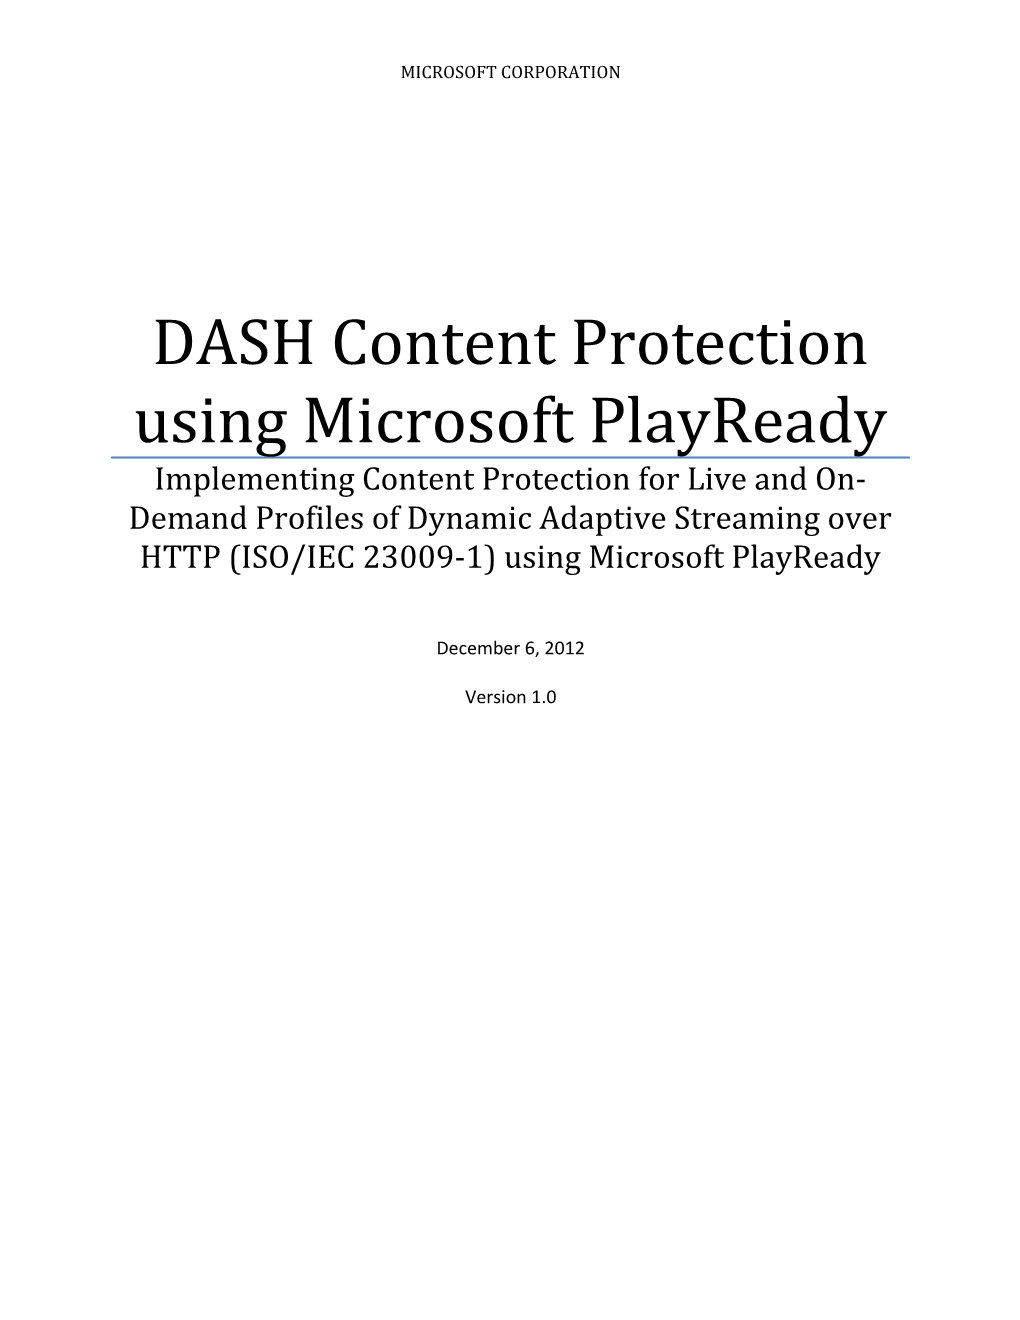 DASH Content Protection Using Microsoft Playready